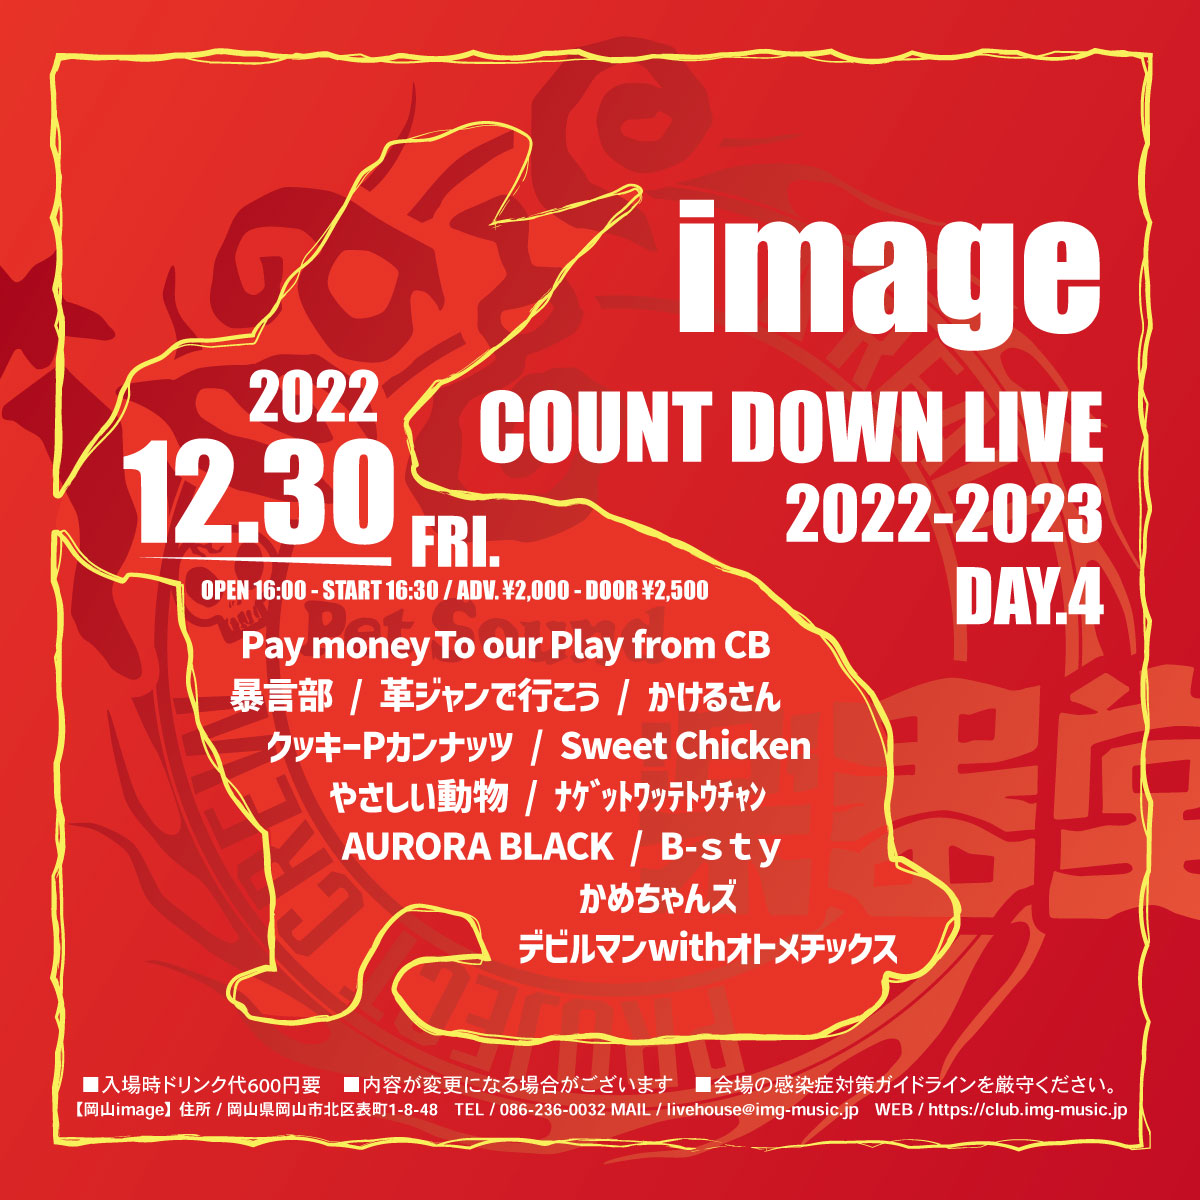 image COUNT DOWN LIVE 2022～2023